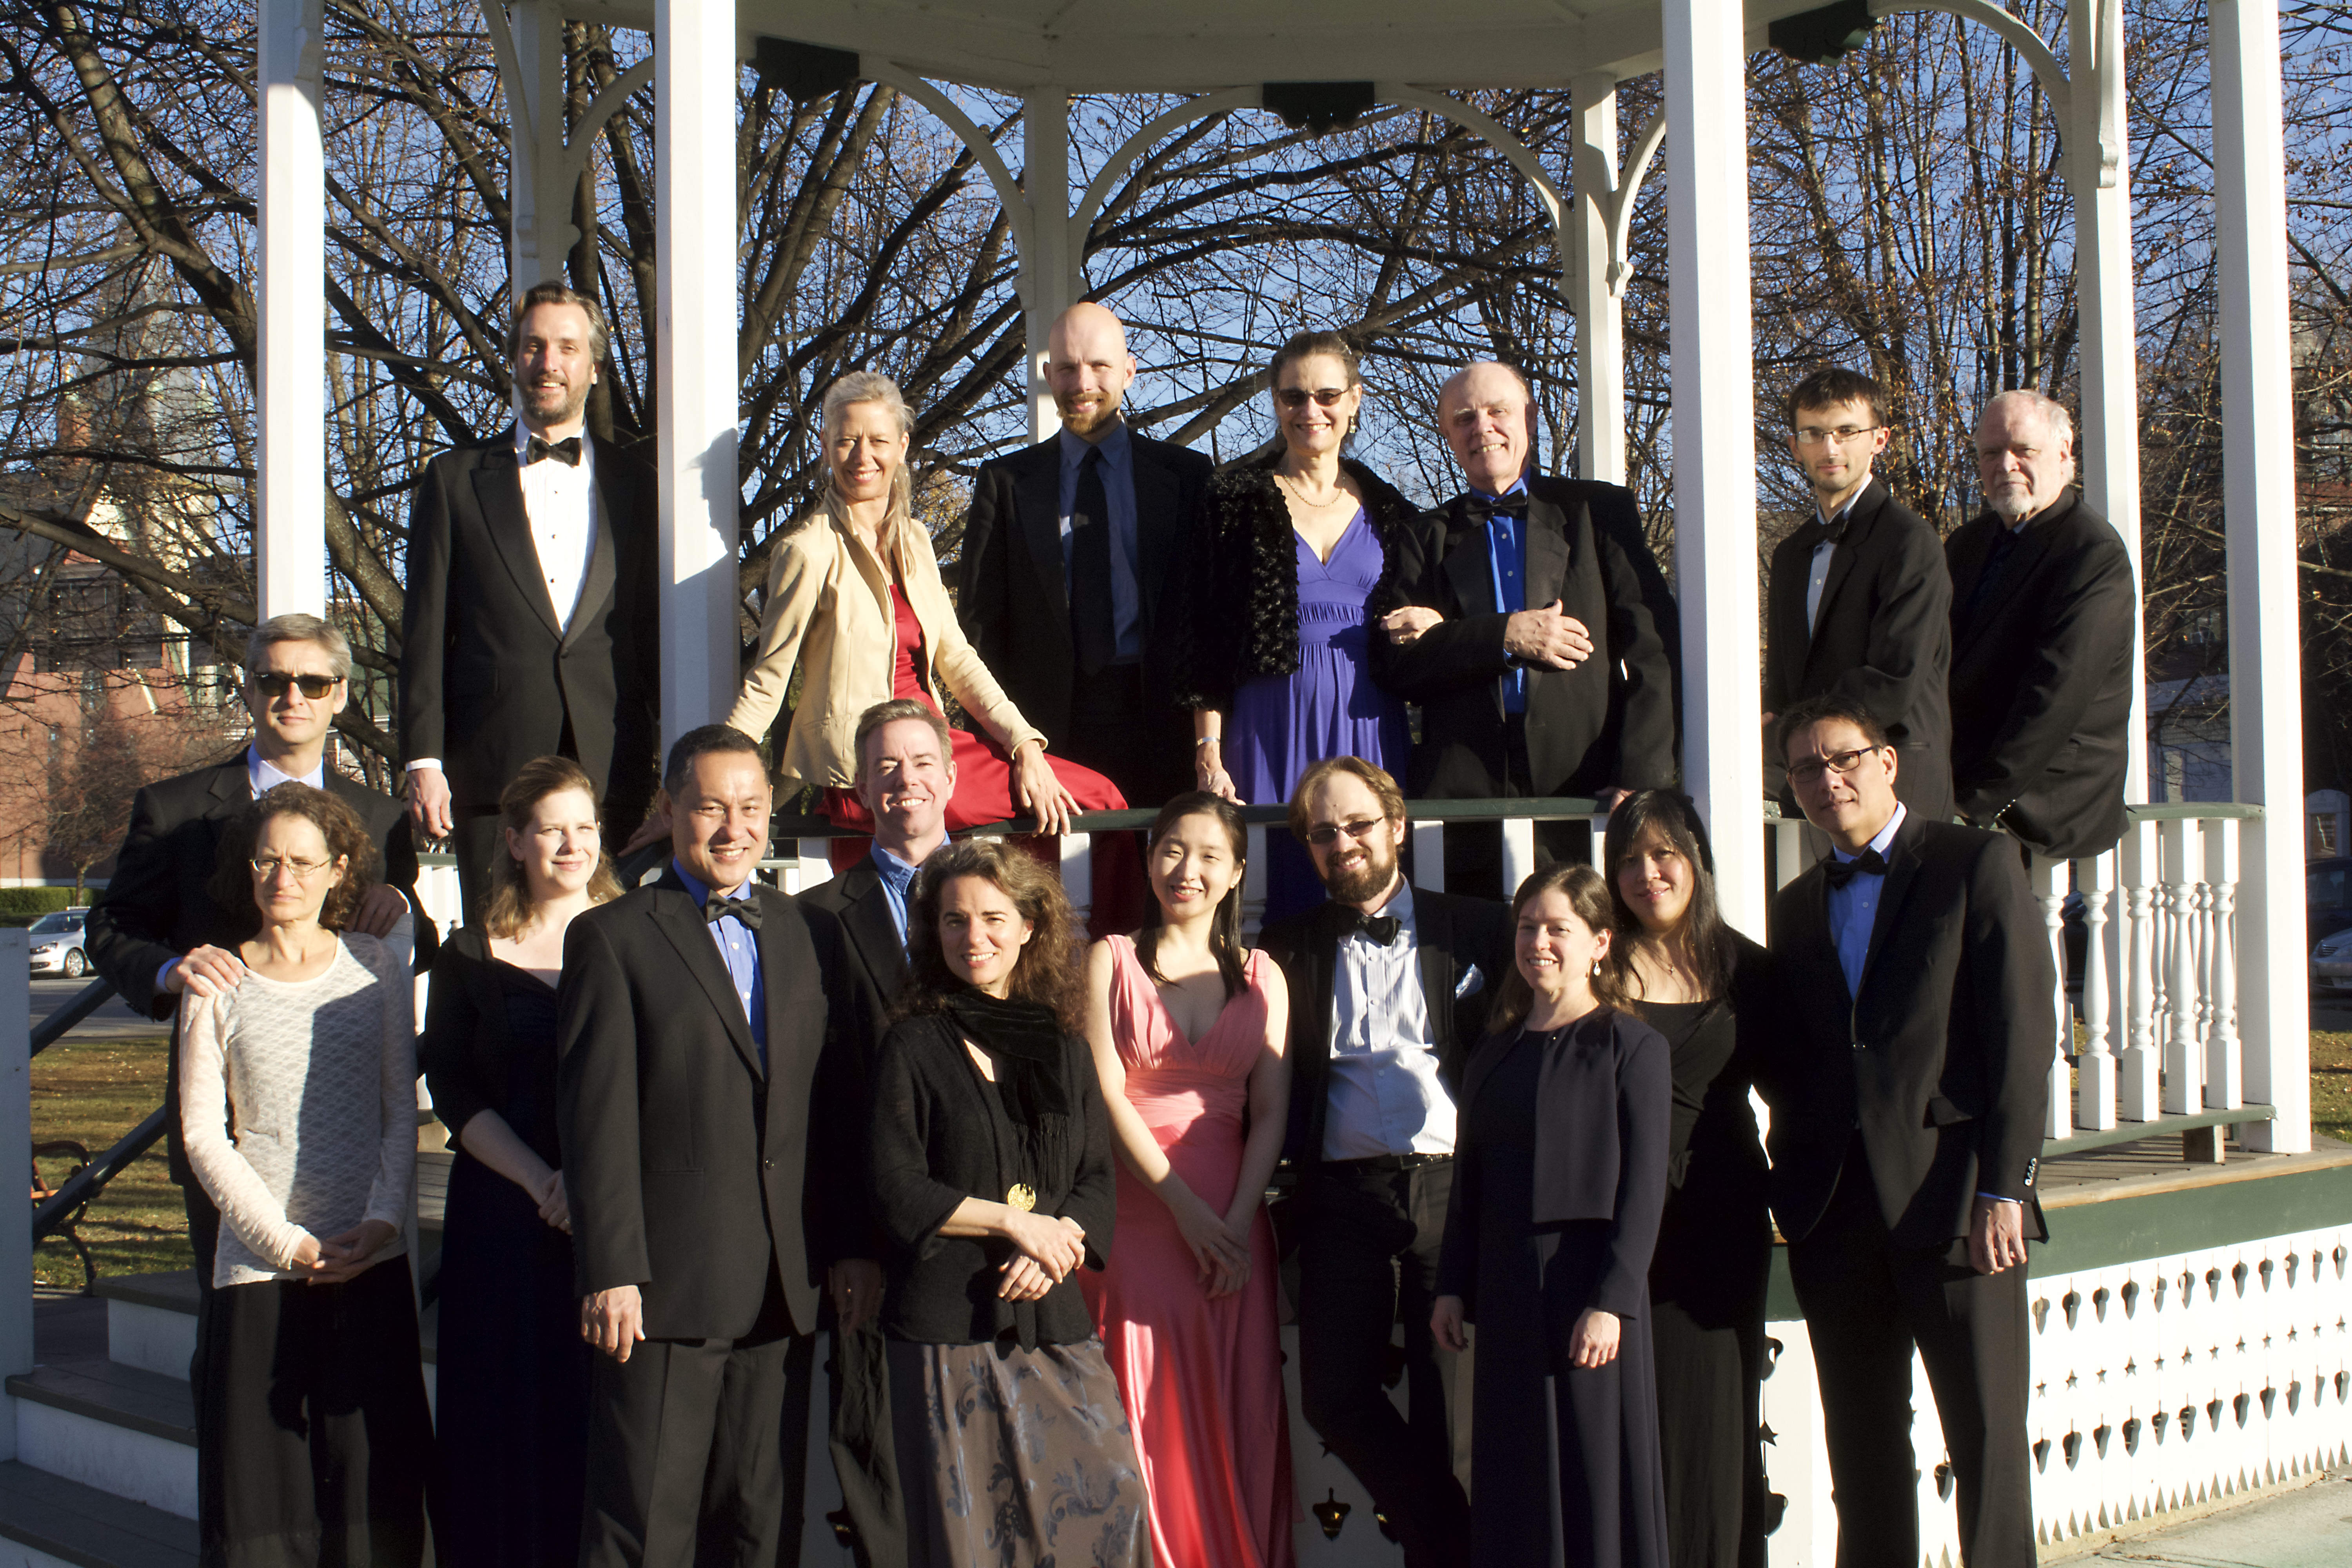 Members of the Eleva Chamber Players